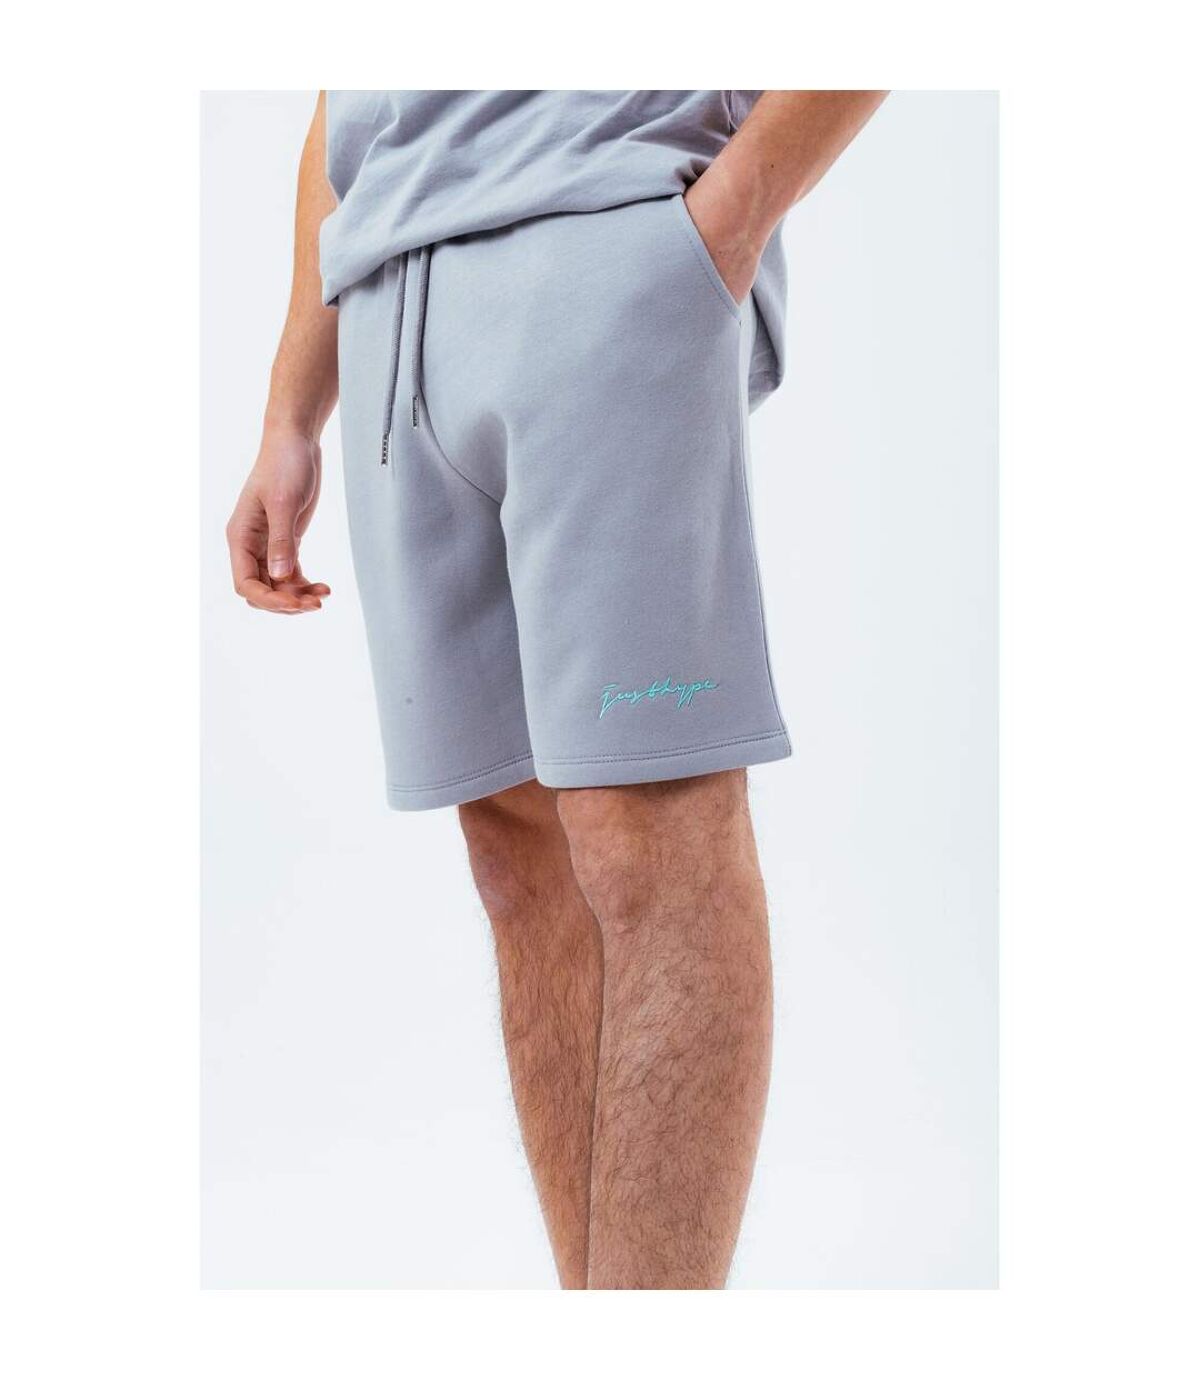 Hype Shorts pour hommes (Gris) - UTHY5331